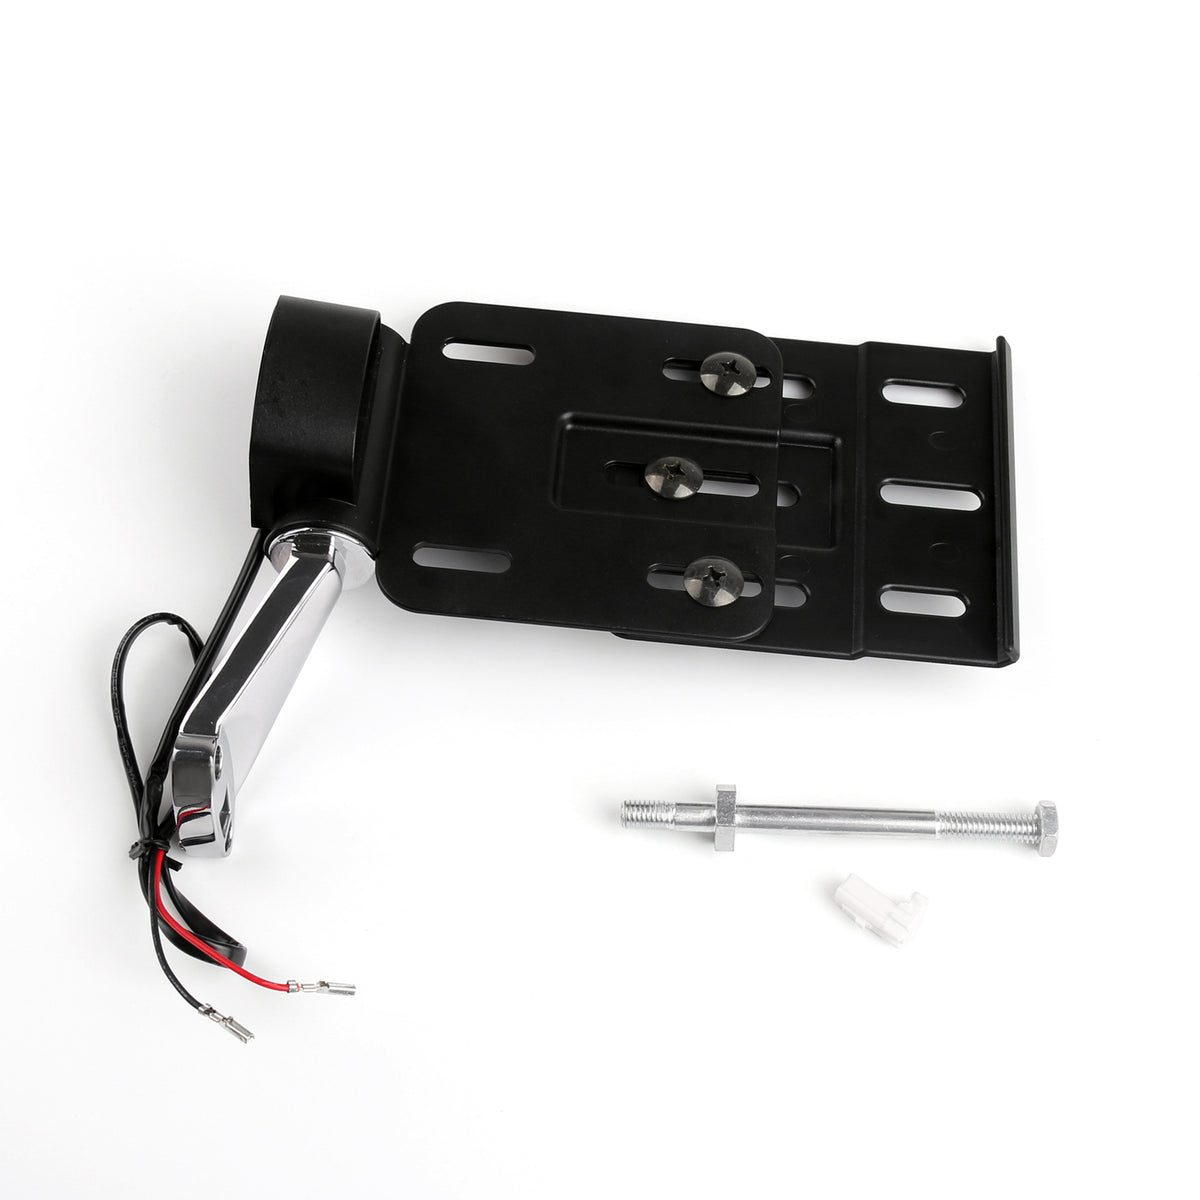 Targa a montaggio laterale con luce a LED per Harley Sportster 1200 Low XL1200L 06-2011